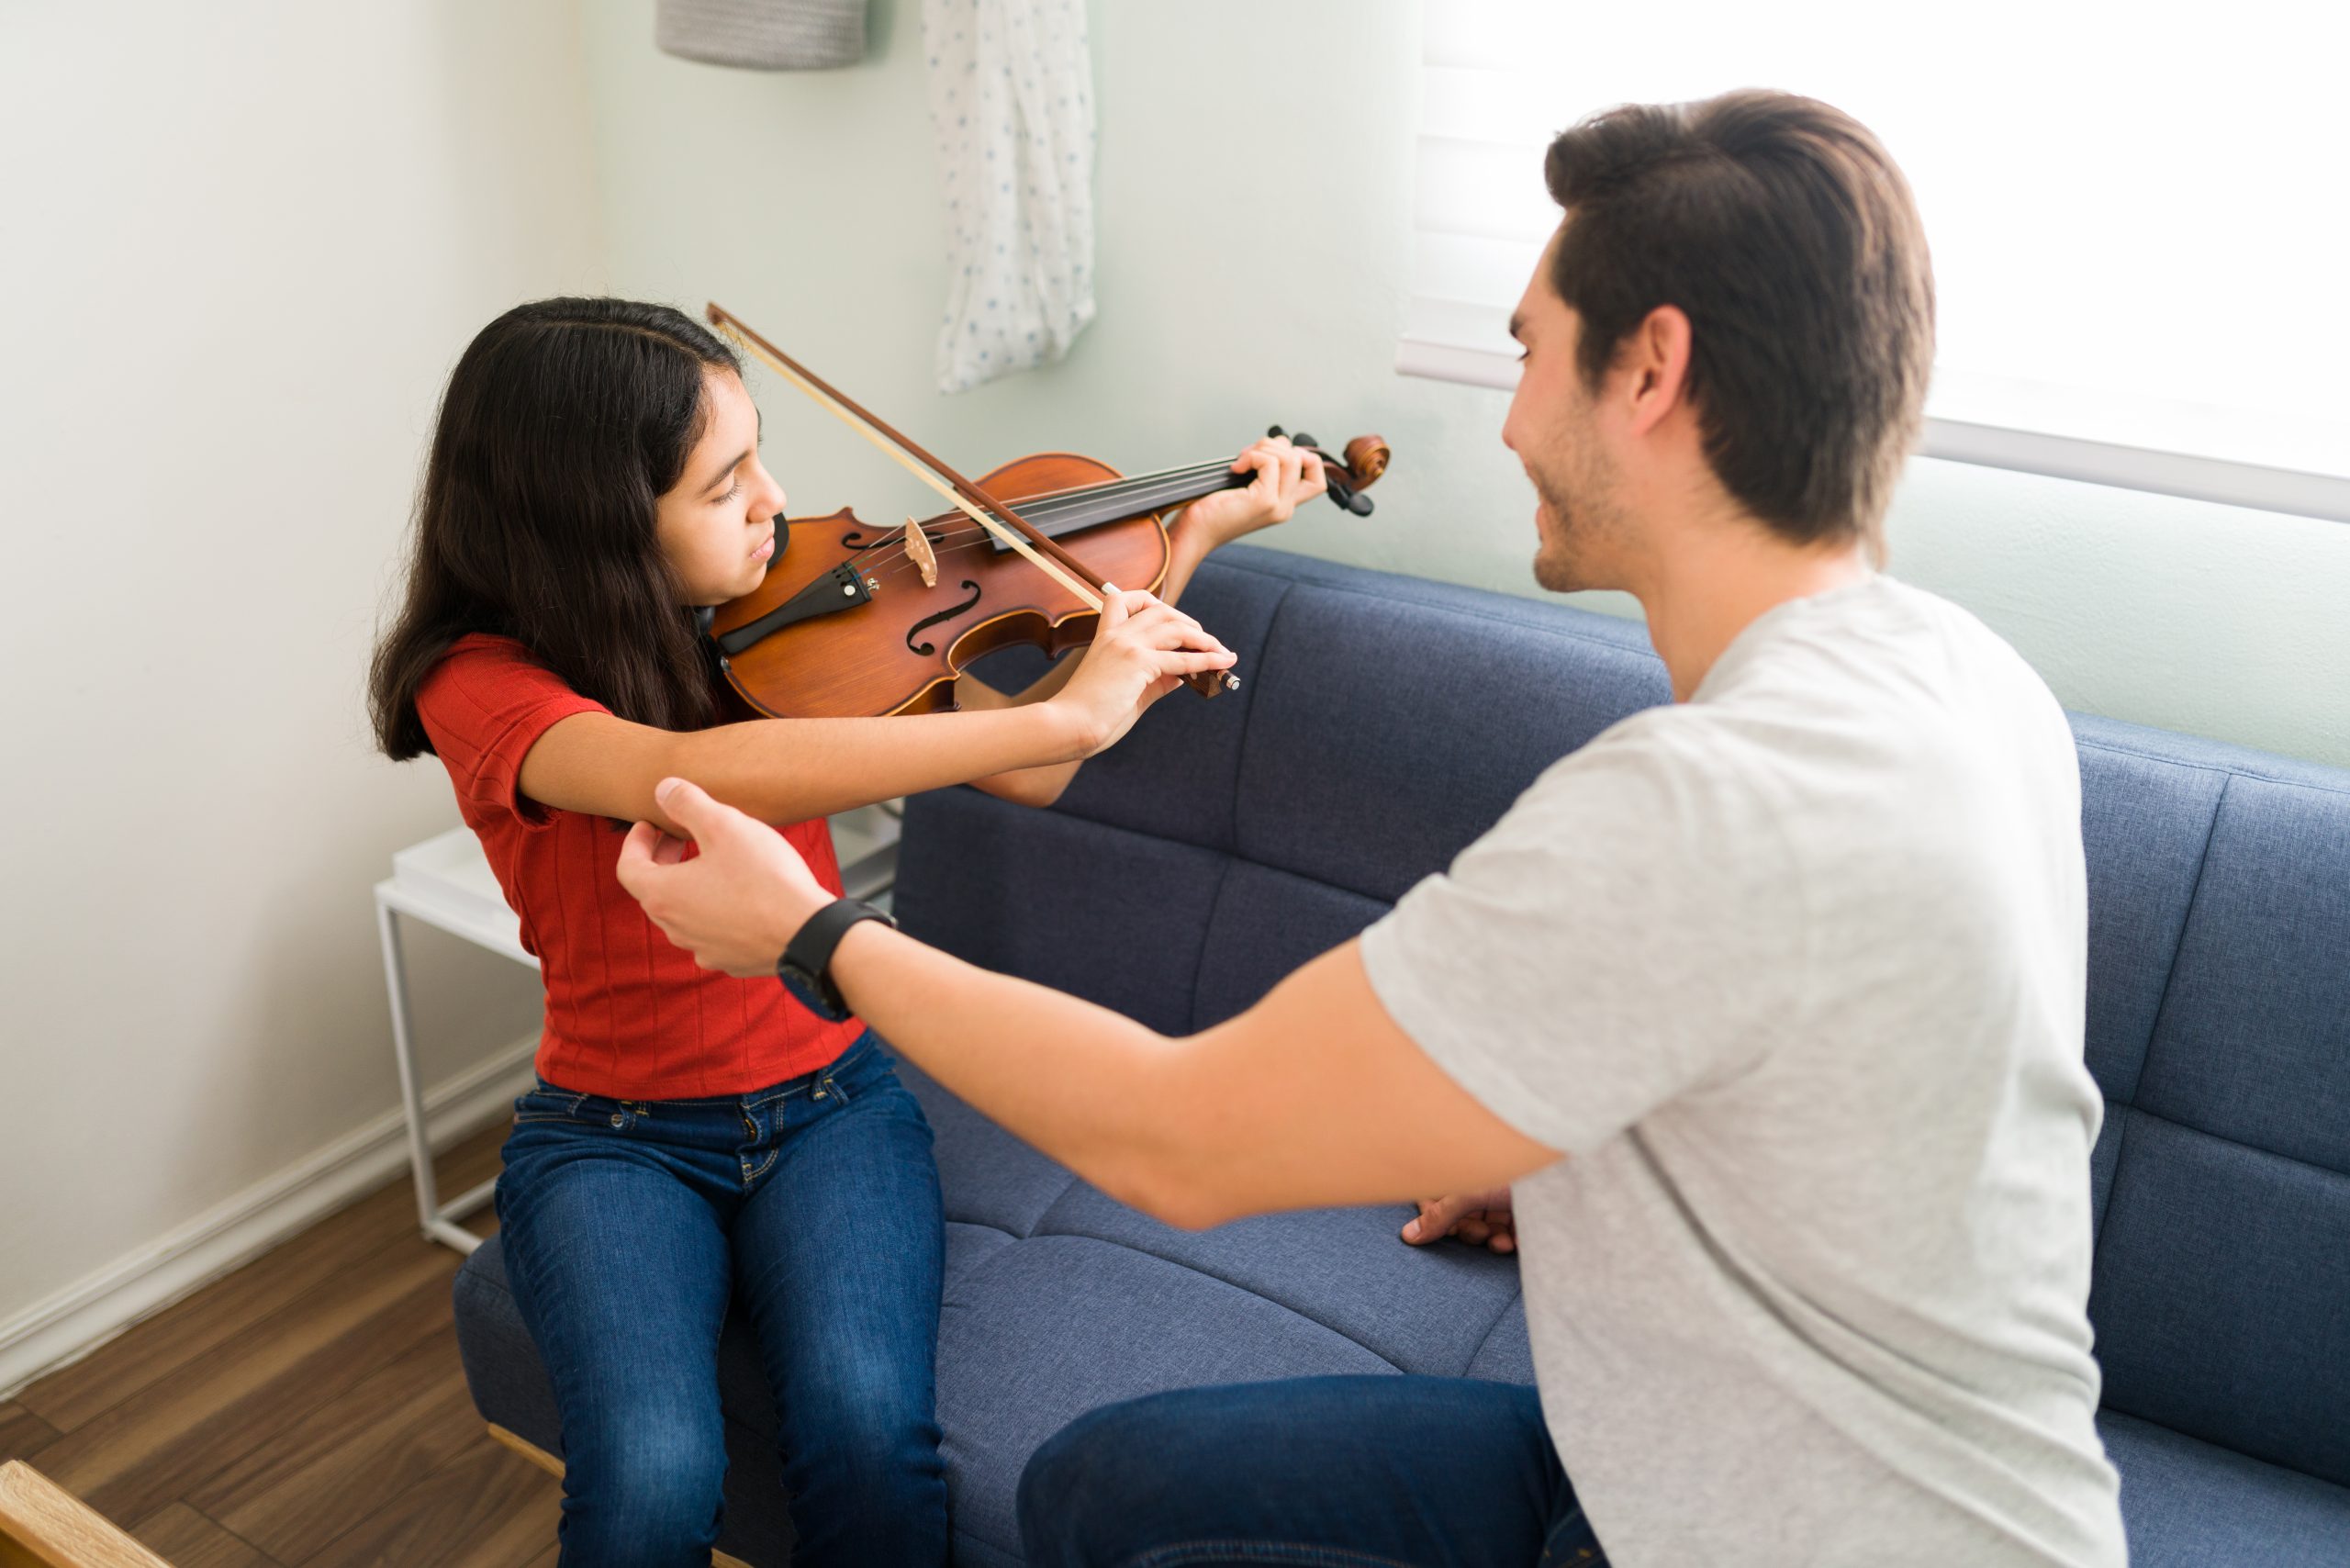 violin teacher correcting the posture of a student learning the violin